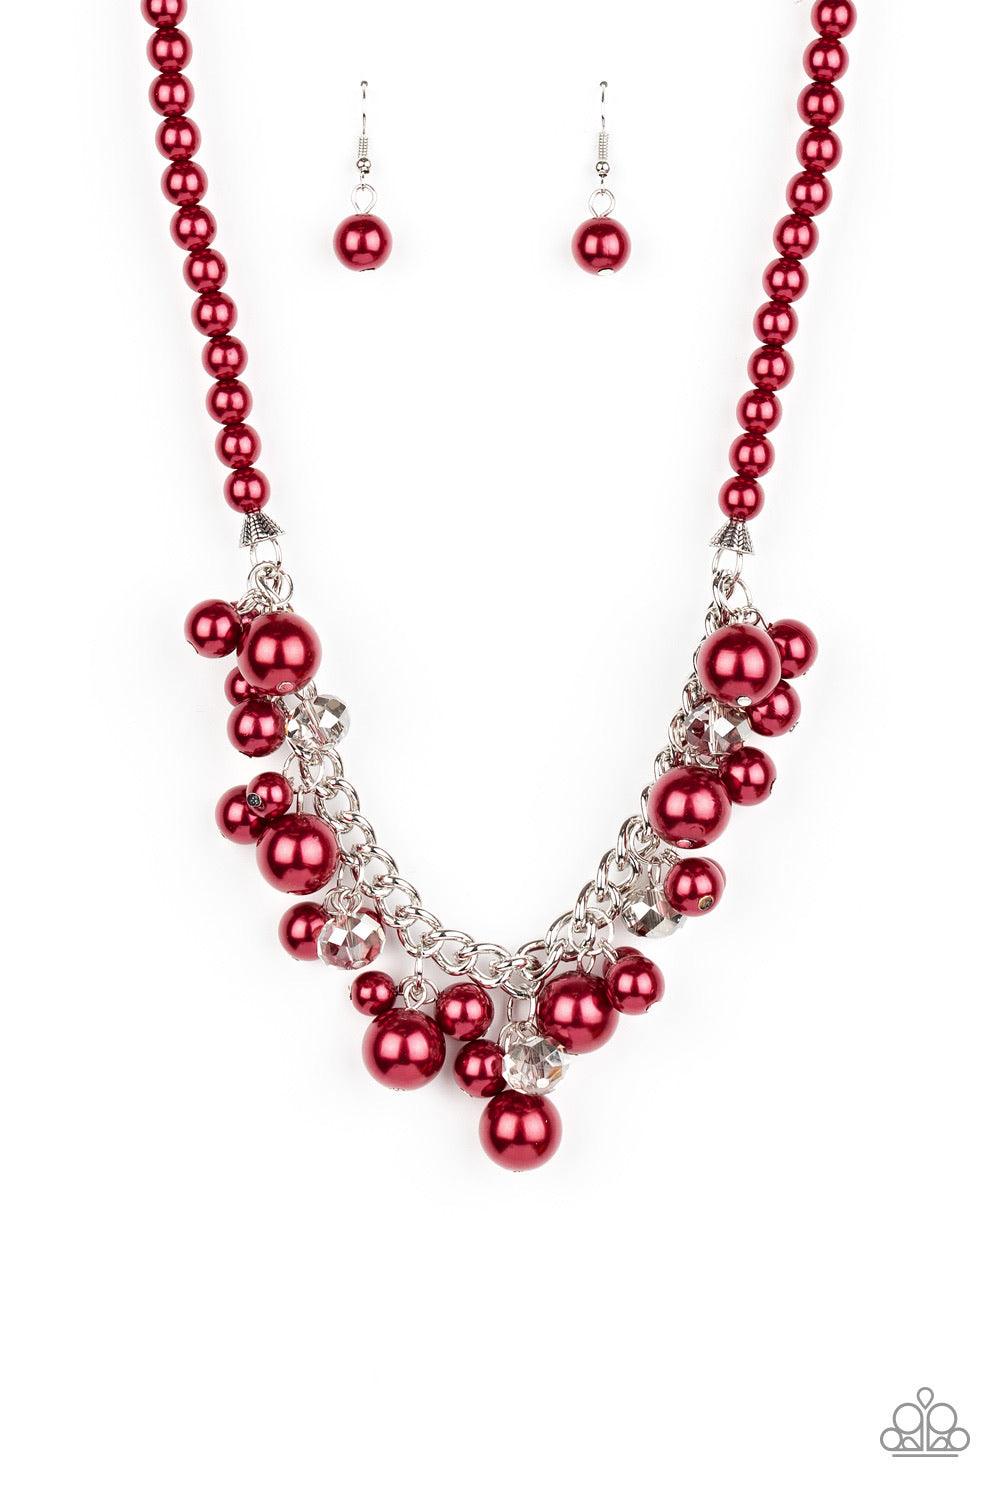 Paparazzi Accessories Prim And POLISHED - Red Threaded along an invisible wire, a pearly strand of red beads gives way to a section of chunky silver chain below the collar. Clusters of pearly red beads and smoky metallic-flecked crystals swing from the ch